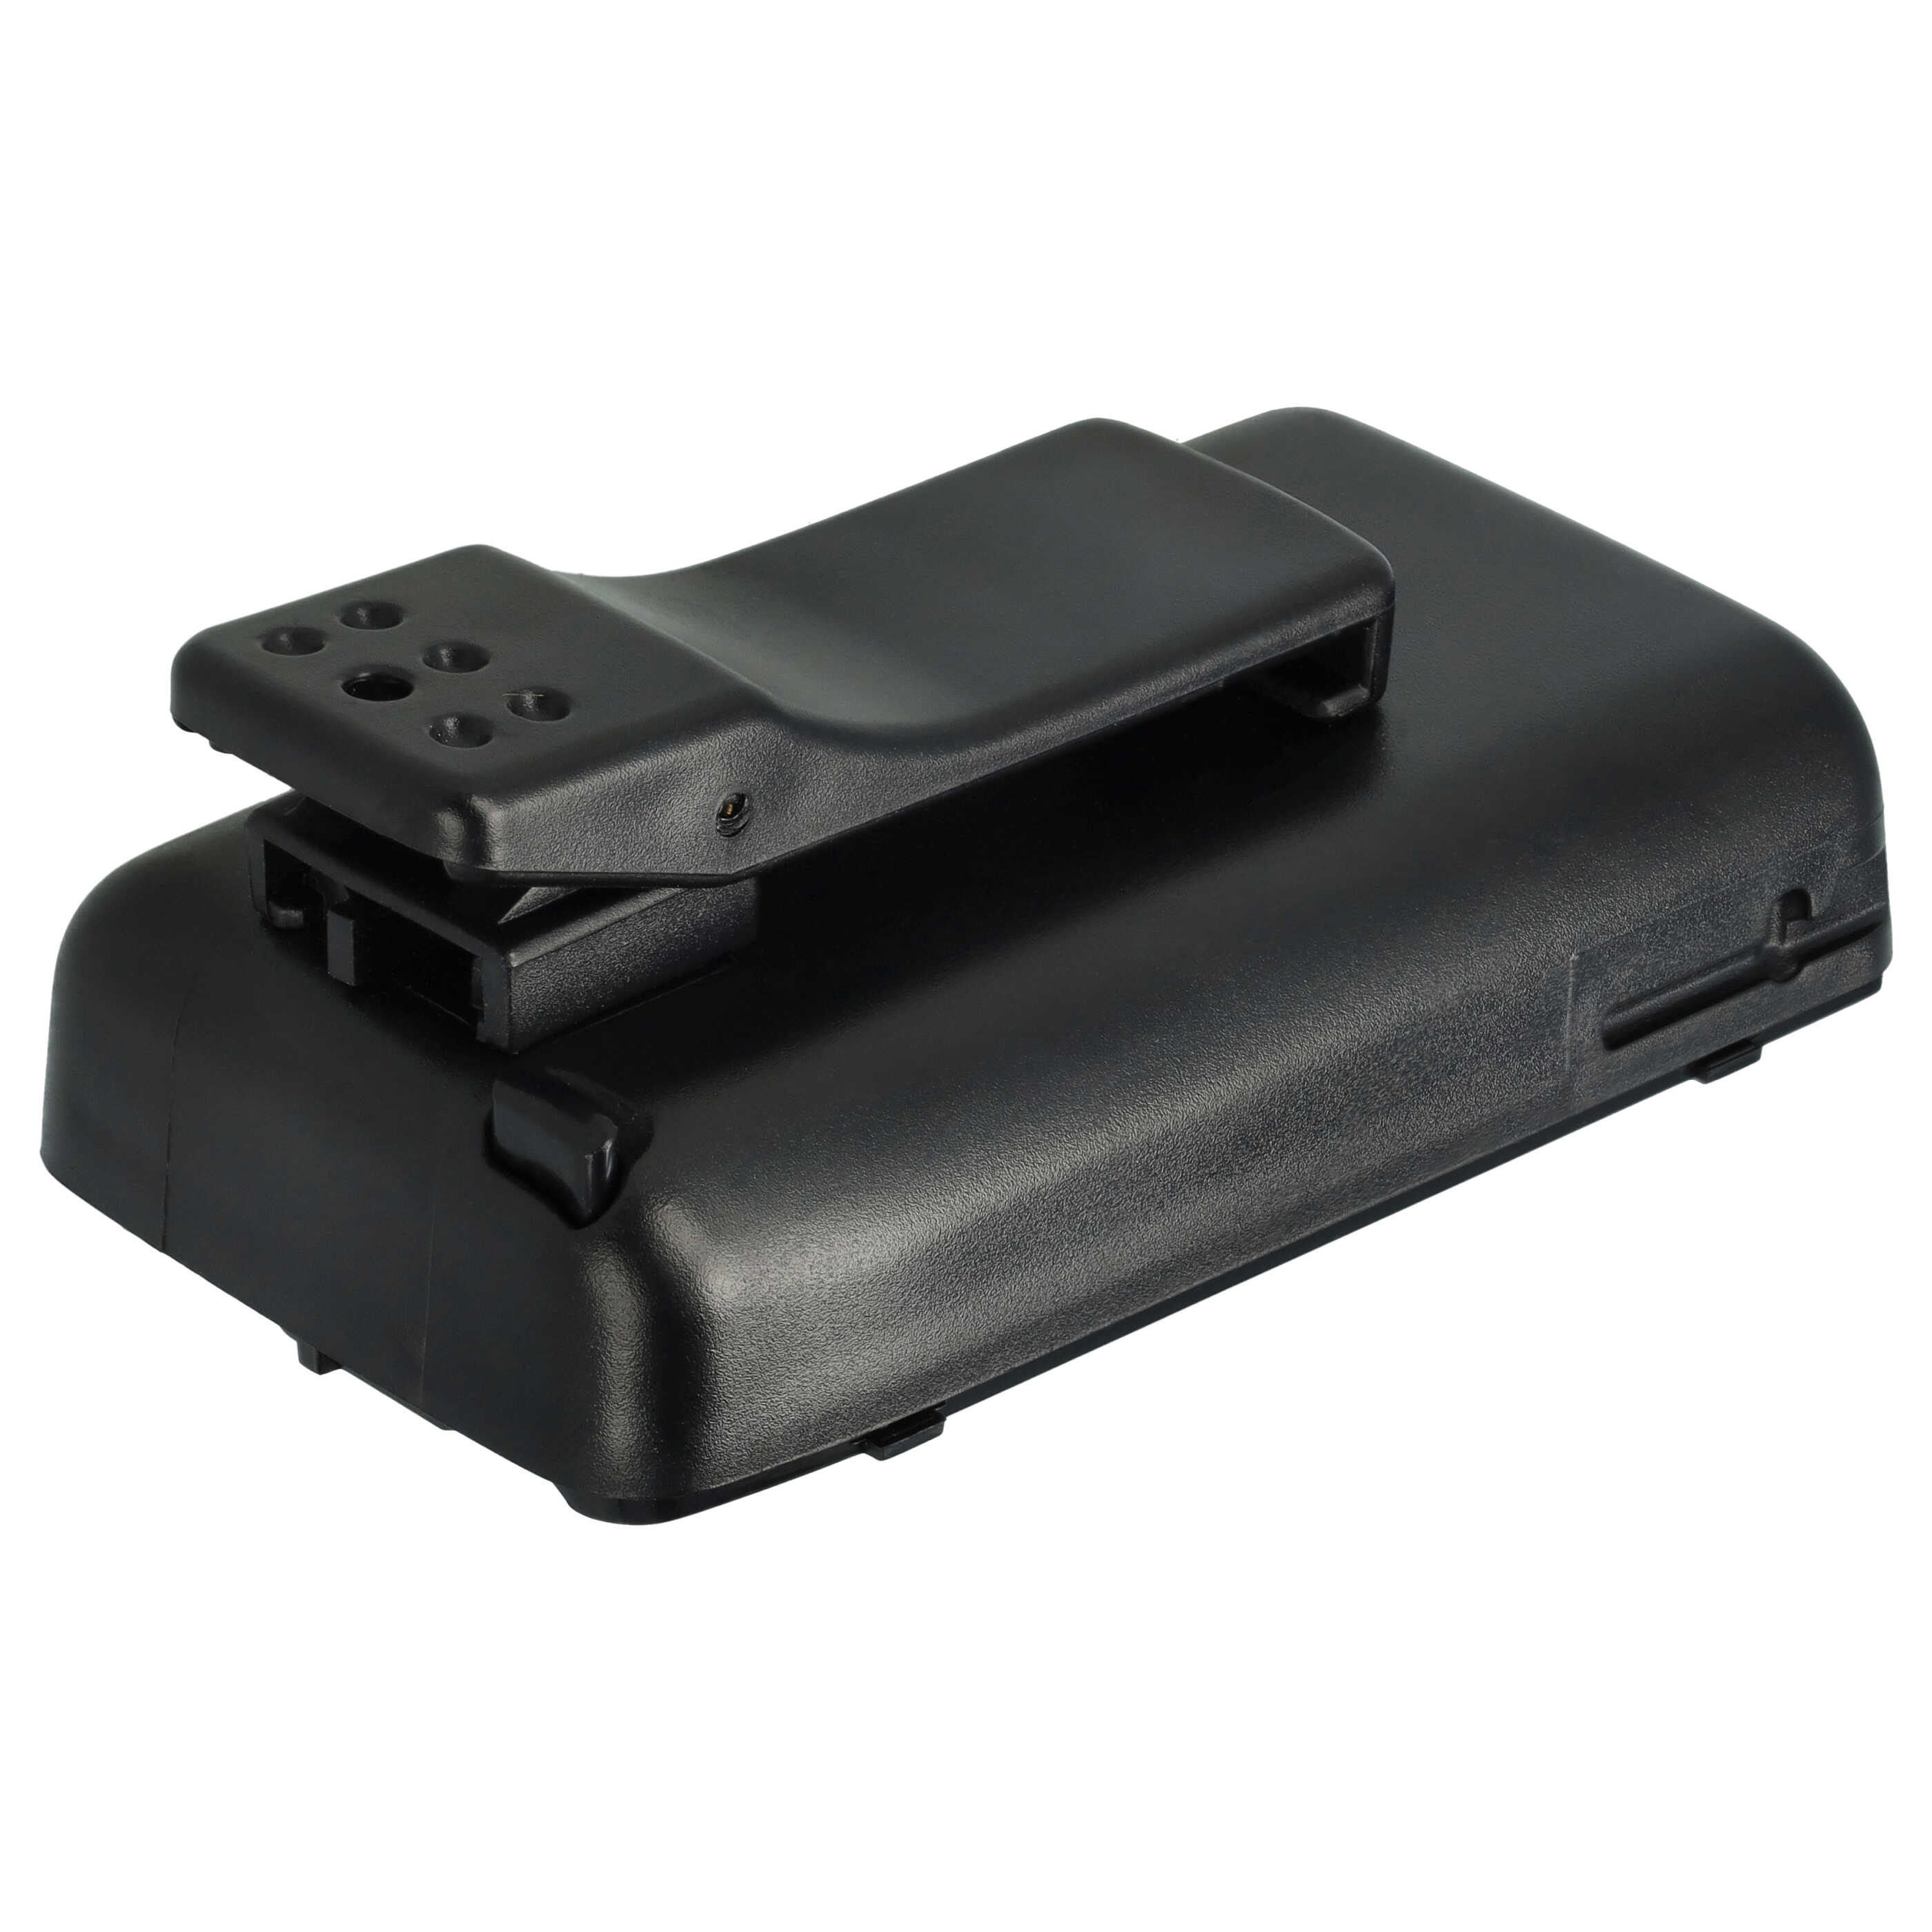 Radio Battery Replacement for FNB-41, FNB-40 - 1000mAh 7.4V NiMH + Belt Clip